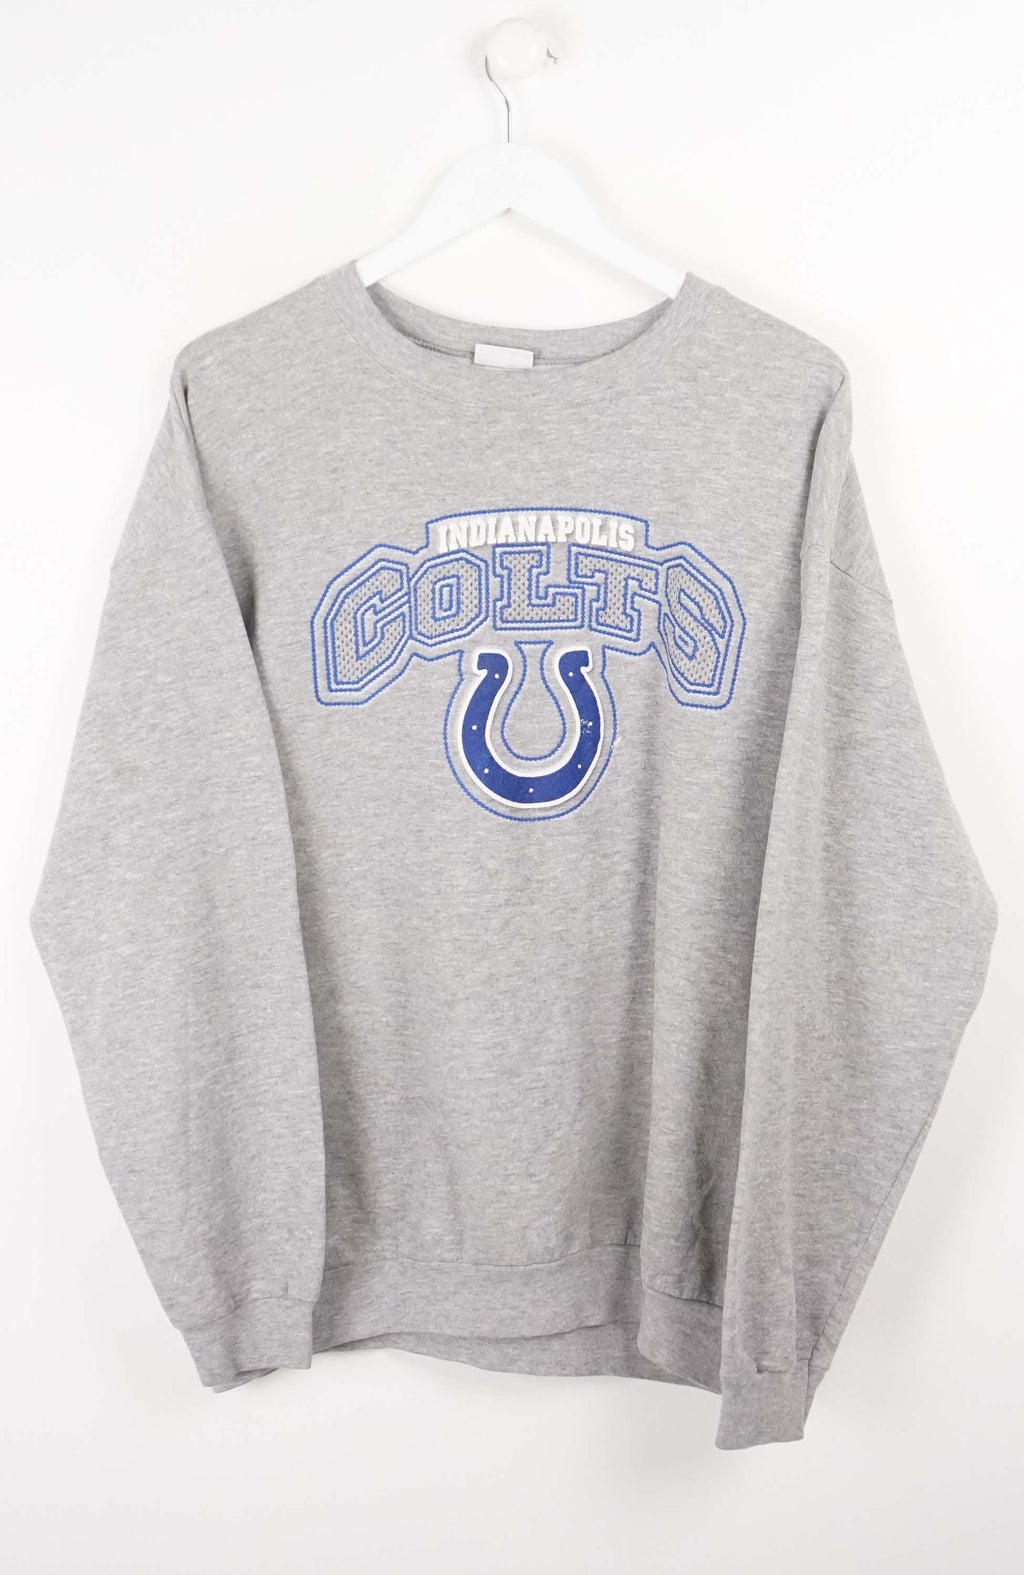 VINTAGE INDIANAPOLIS COLTS SWEATER (L)